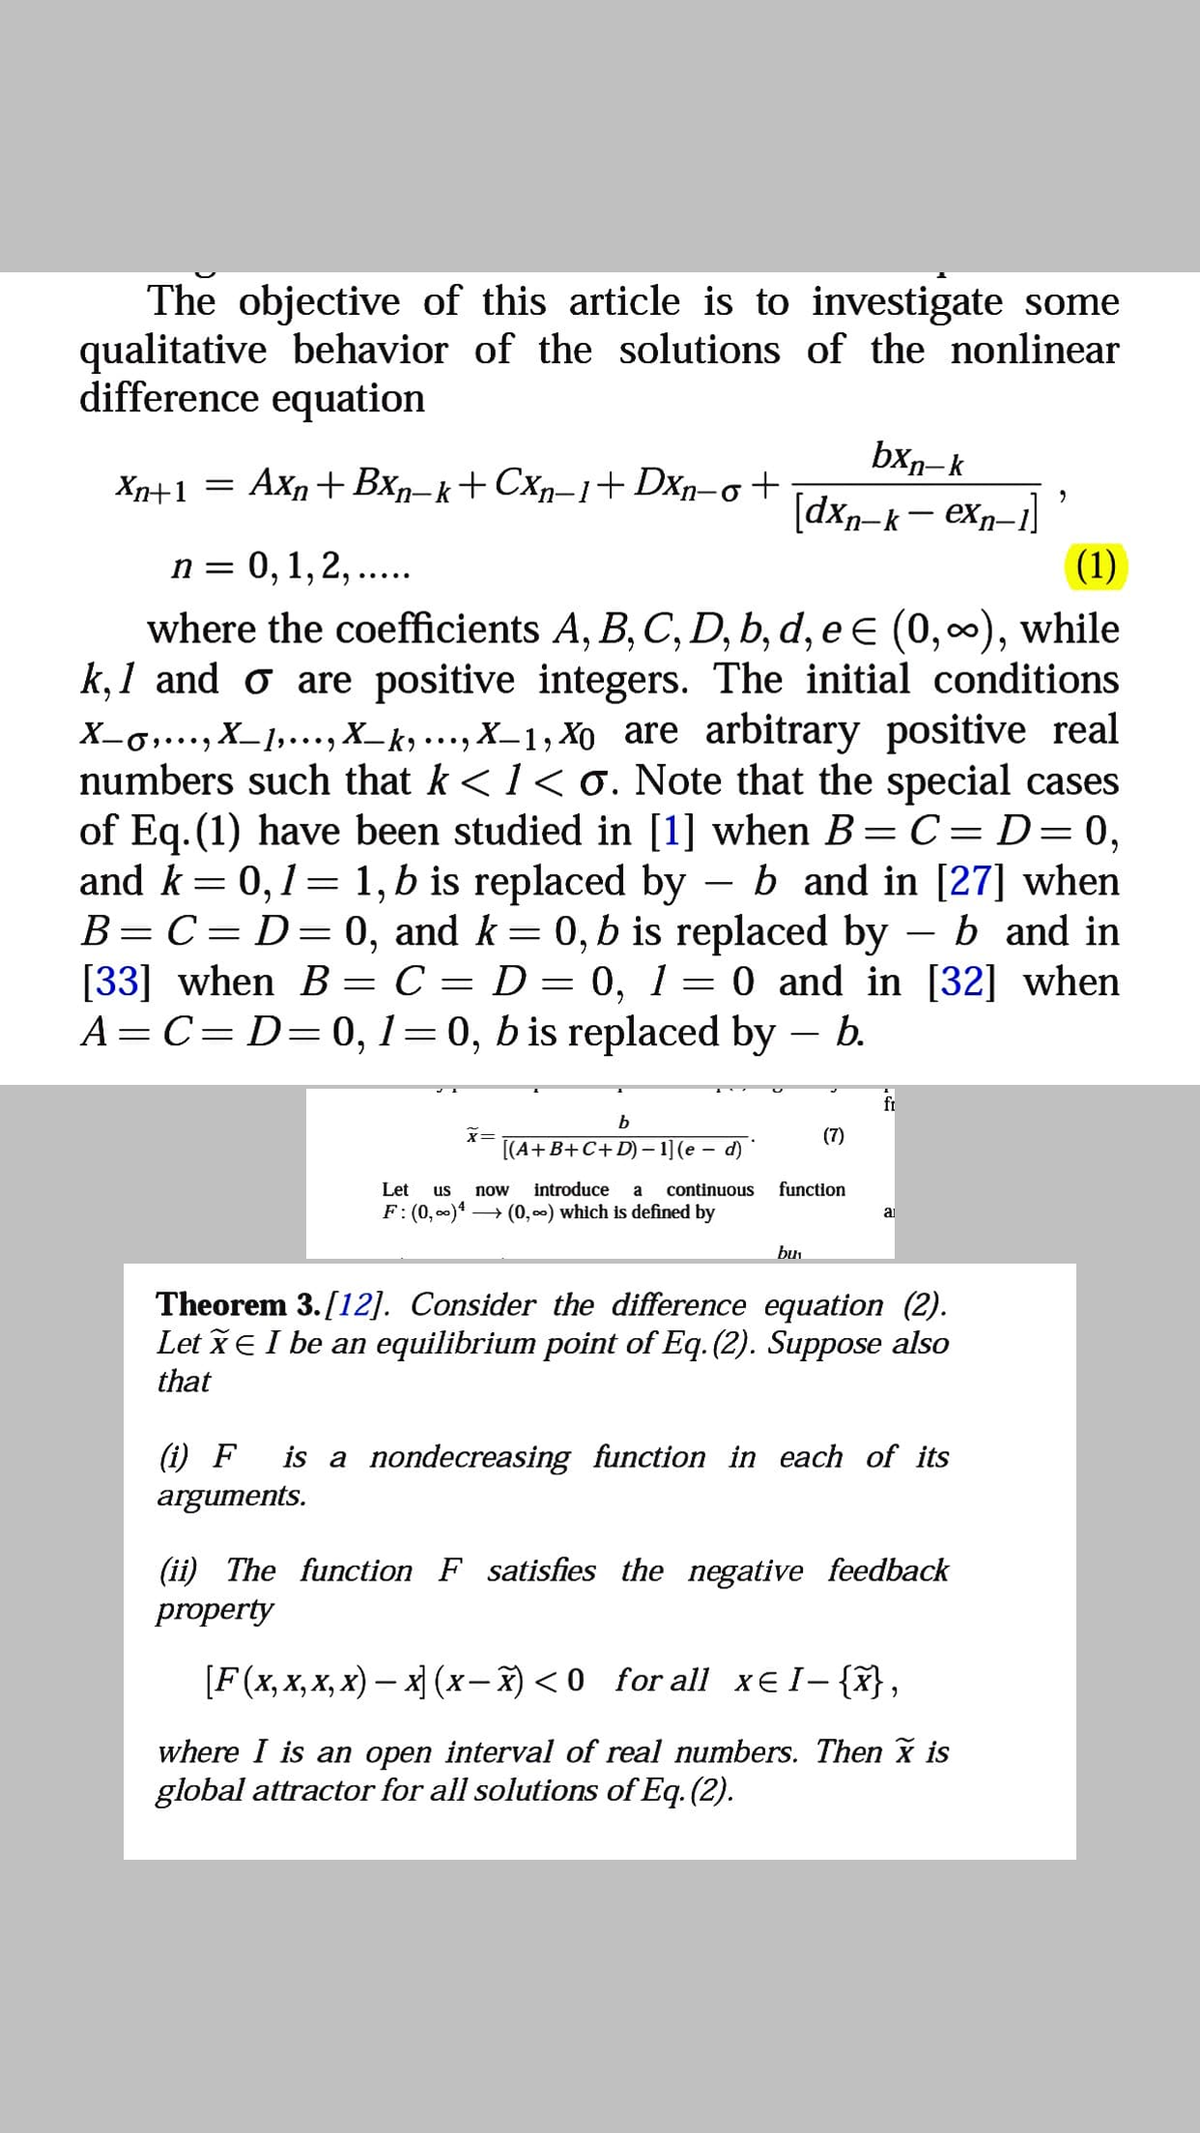 The objective of this article is to investigate some
qualitative behavior of the solutions of the nonlinear
difference equation
bxn-k
Xn+1 = Axn+ Bxŋ-k+Cxn-1+Dxn-o+
[dxn-k– exn-1]
(1)
n = 0,1,2, ...
where the coefficients A, B, C, D, b, d, e E (0,0), while
k, 1 and o are positive integers. The initial conditions
X-g,..., X_1,..., X_k ..., X_1, Xo are arbitrary positive real
numbers such that k <1< o. Note that the special cases
of Eq. (1) have been studied in [1] when B=C= D=0,
and k= 0,1= 1, b is replaced by – b and in [27] when
B=C= D=0, and k = 0, b is replaced by – b and in
[33] when B = C = D = 0, 1= 0 and in [32] when
A= C= D=0, 1=0, b is replaced by – b.
6.
•.•9
-
6.
|
(7)
[(A+B+C+ D) – 1] (e – d)
Let
us
now
introduce
a
continuous
function
F: (0, 0)* → (0, ) which is defined by
ai
bu
Theorem 3.[12]. Consider the difference equation (2).
Let xe I be an equilibrium point of Eq. (2). Suppose also
that
(i) F
is a nondecreasing function in each of its
arguments.
(ii) The function F satisfies the negative feedback
property
[F (x, X,х, х) — х (х- %) <0 for all х€1-{},
where I is an open interval of real numbers. Then x is
global attractor for all solutions of Eq. (2).
